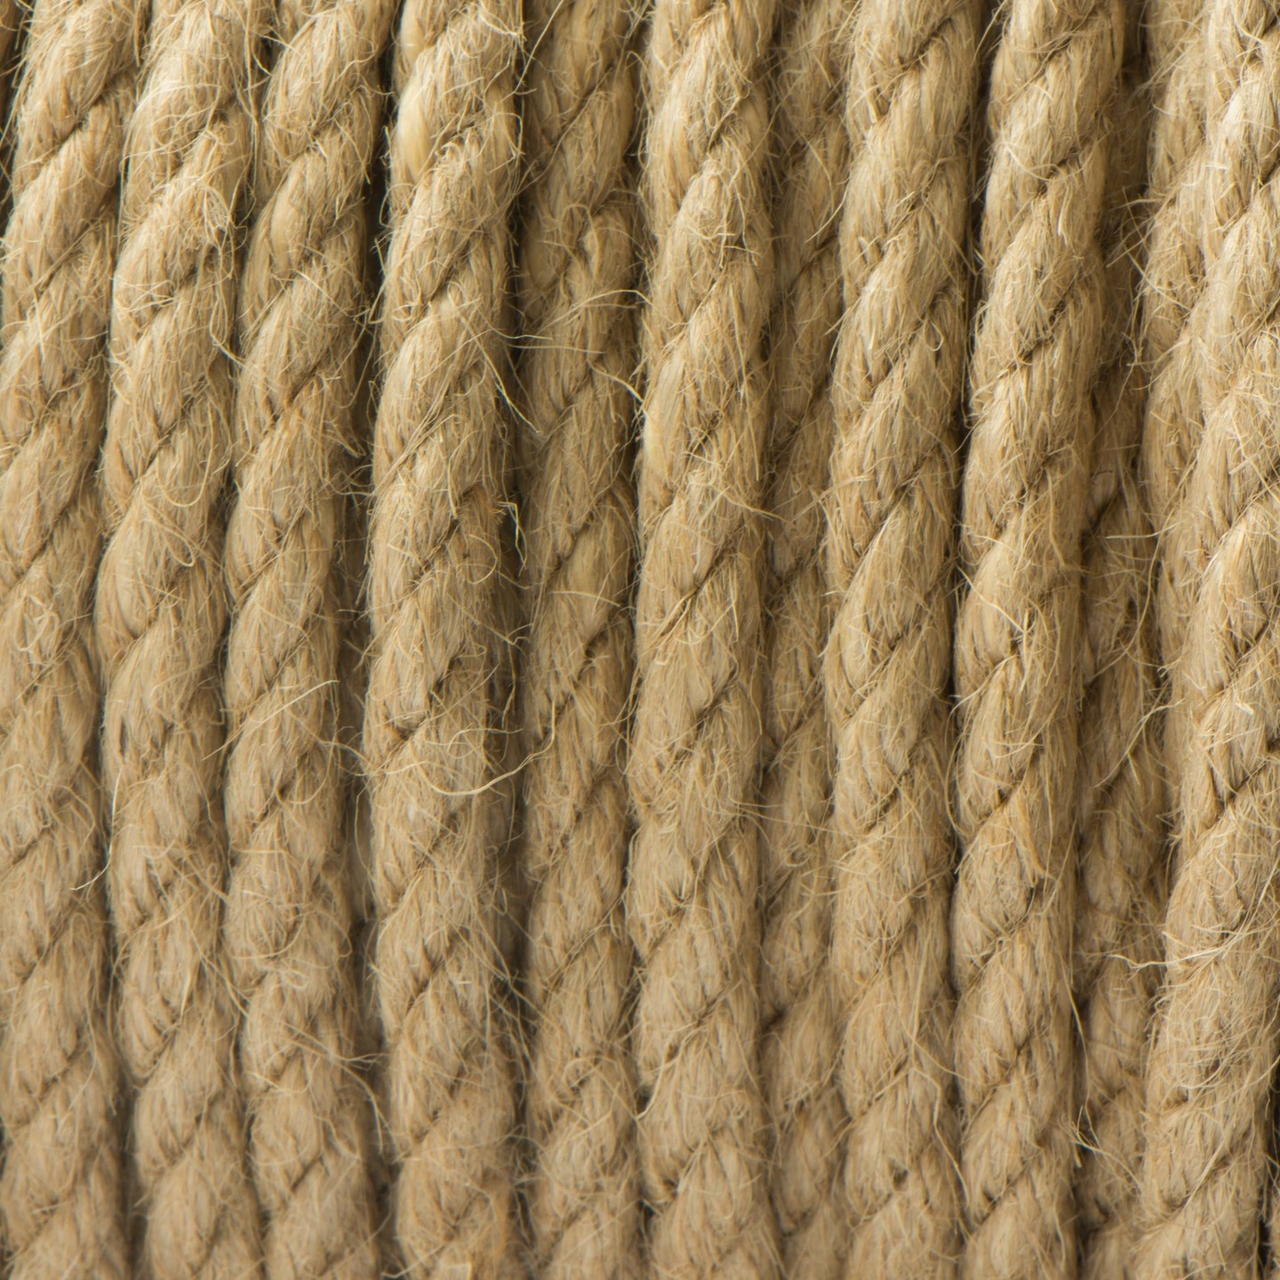 Jute Twisted Rope 6 mm/10 m Not Waxed Natural Jute Garden from the Manufacturer 